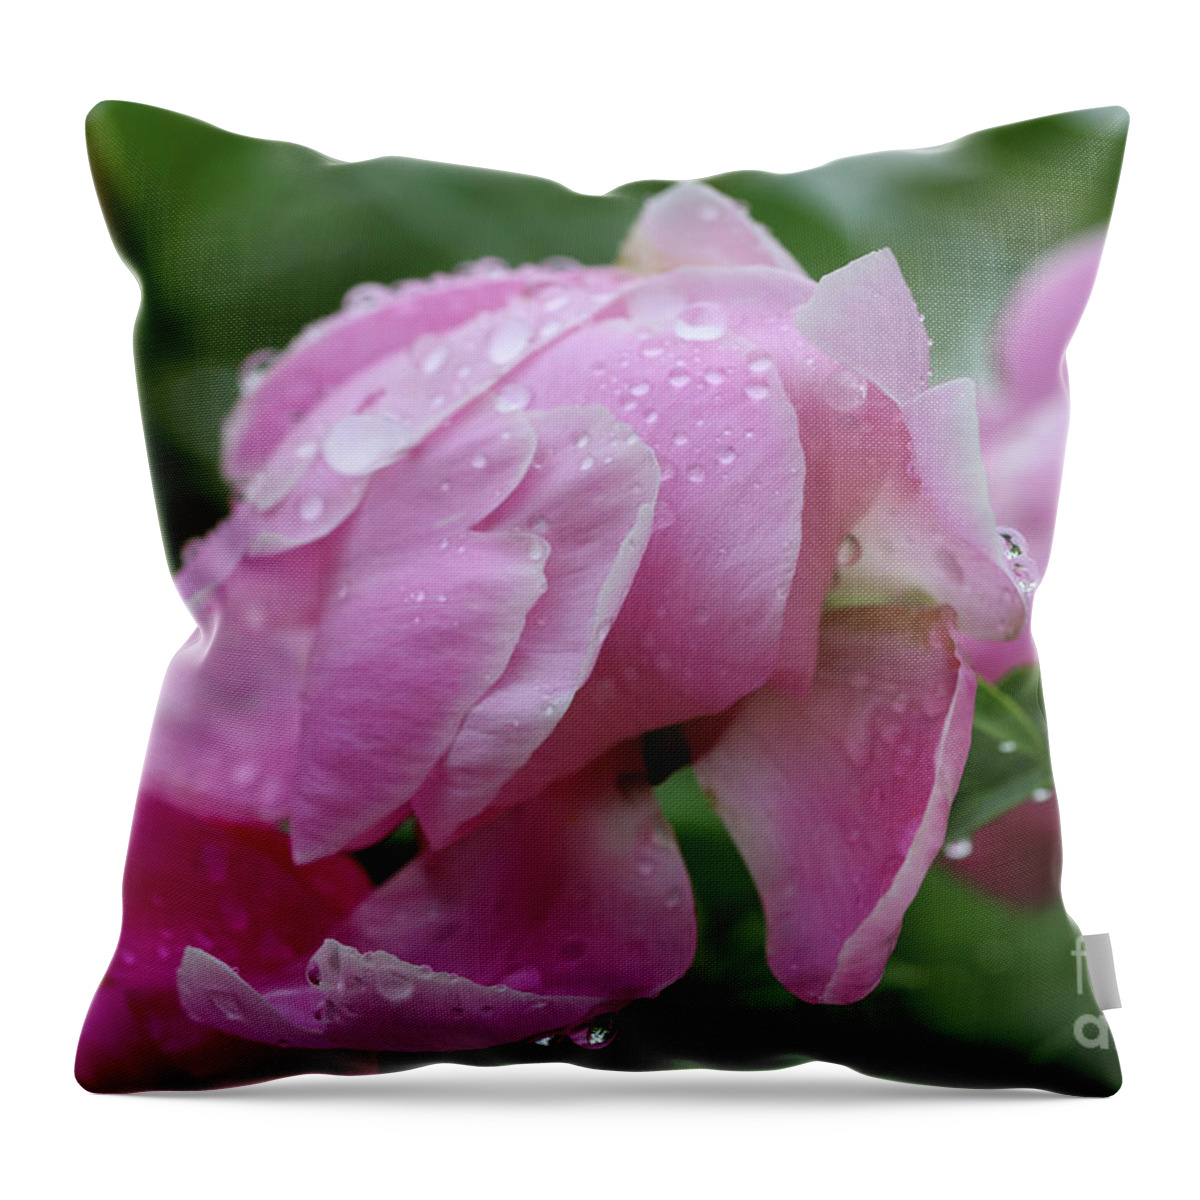 Rainy Day Peonies Throw Pillow featuring the photograph Rainy Day Peonies by Rachel Cohen